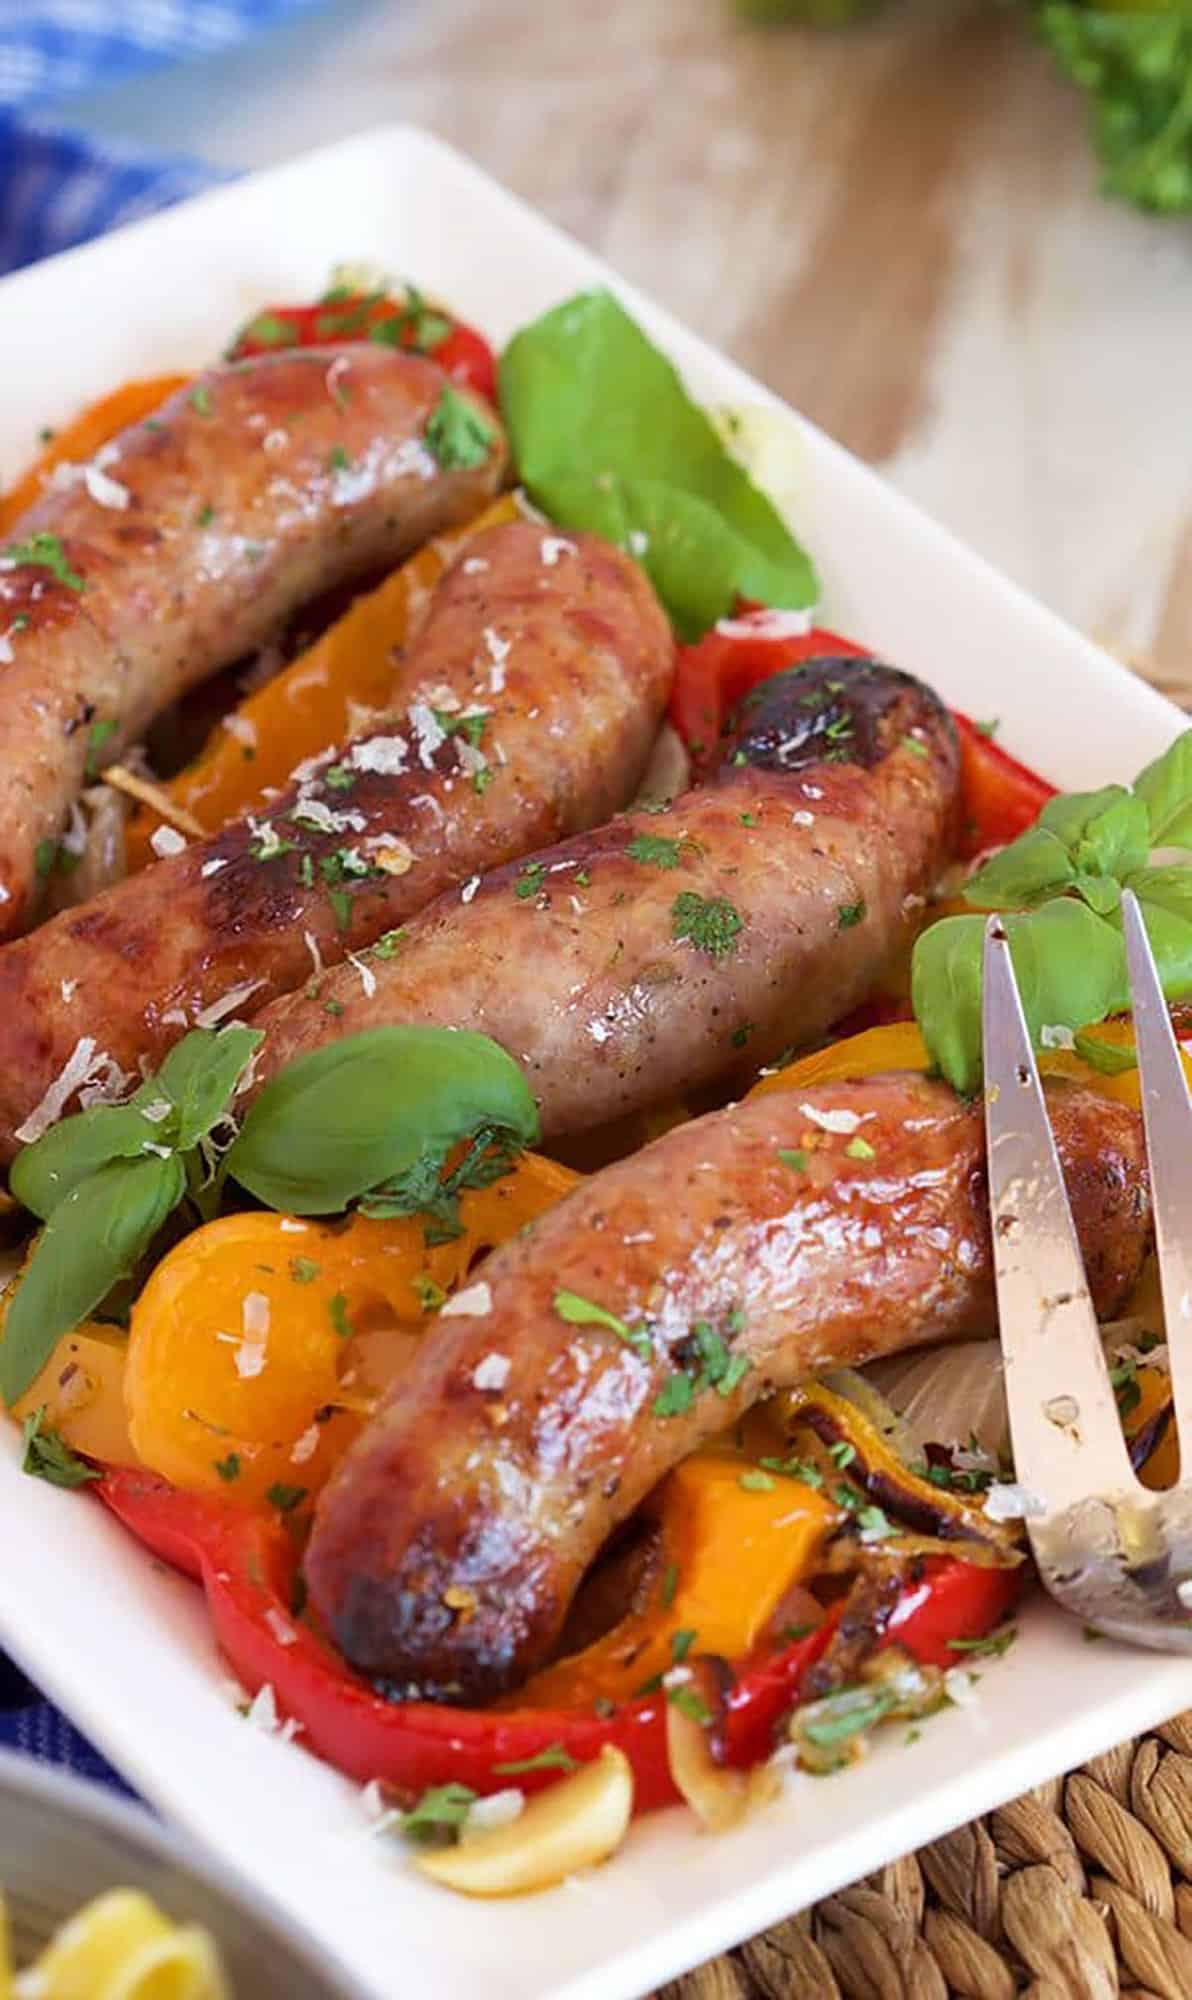 Italian sausage with peppers on a white platter garnished with basil leaves.